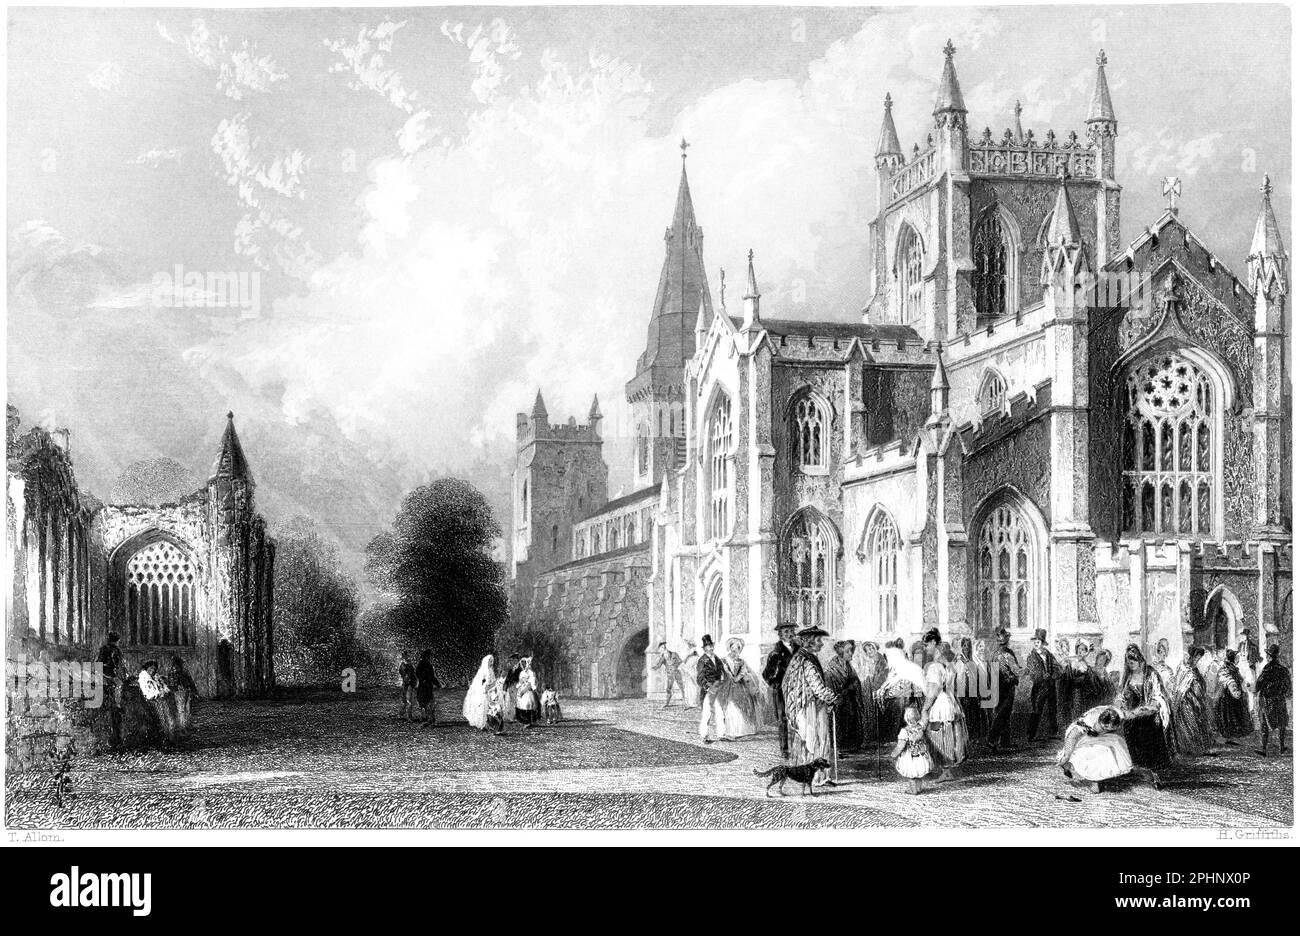 An engraving of The New Church and Abbey, Dunfermline, Fifeshire, Scotland UK scanned at high resolution from a book printed in 1840. Stock Photo